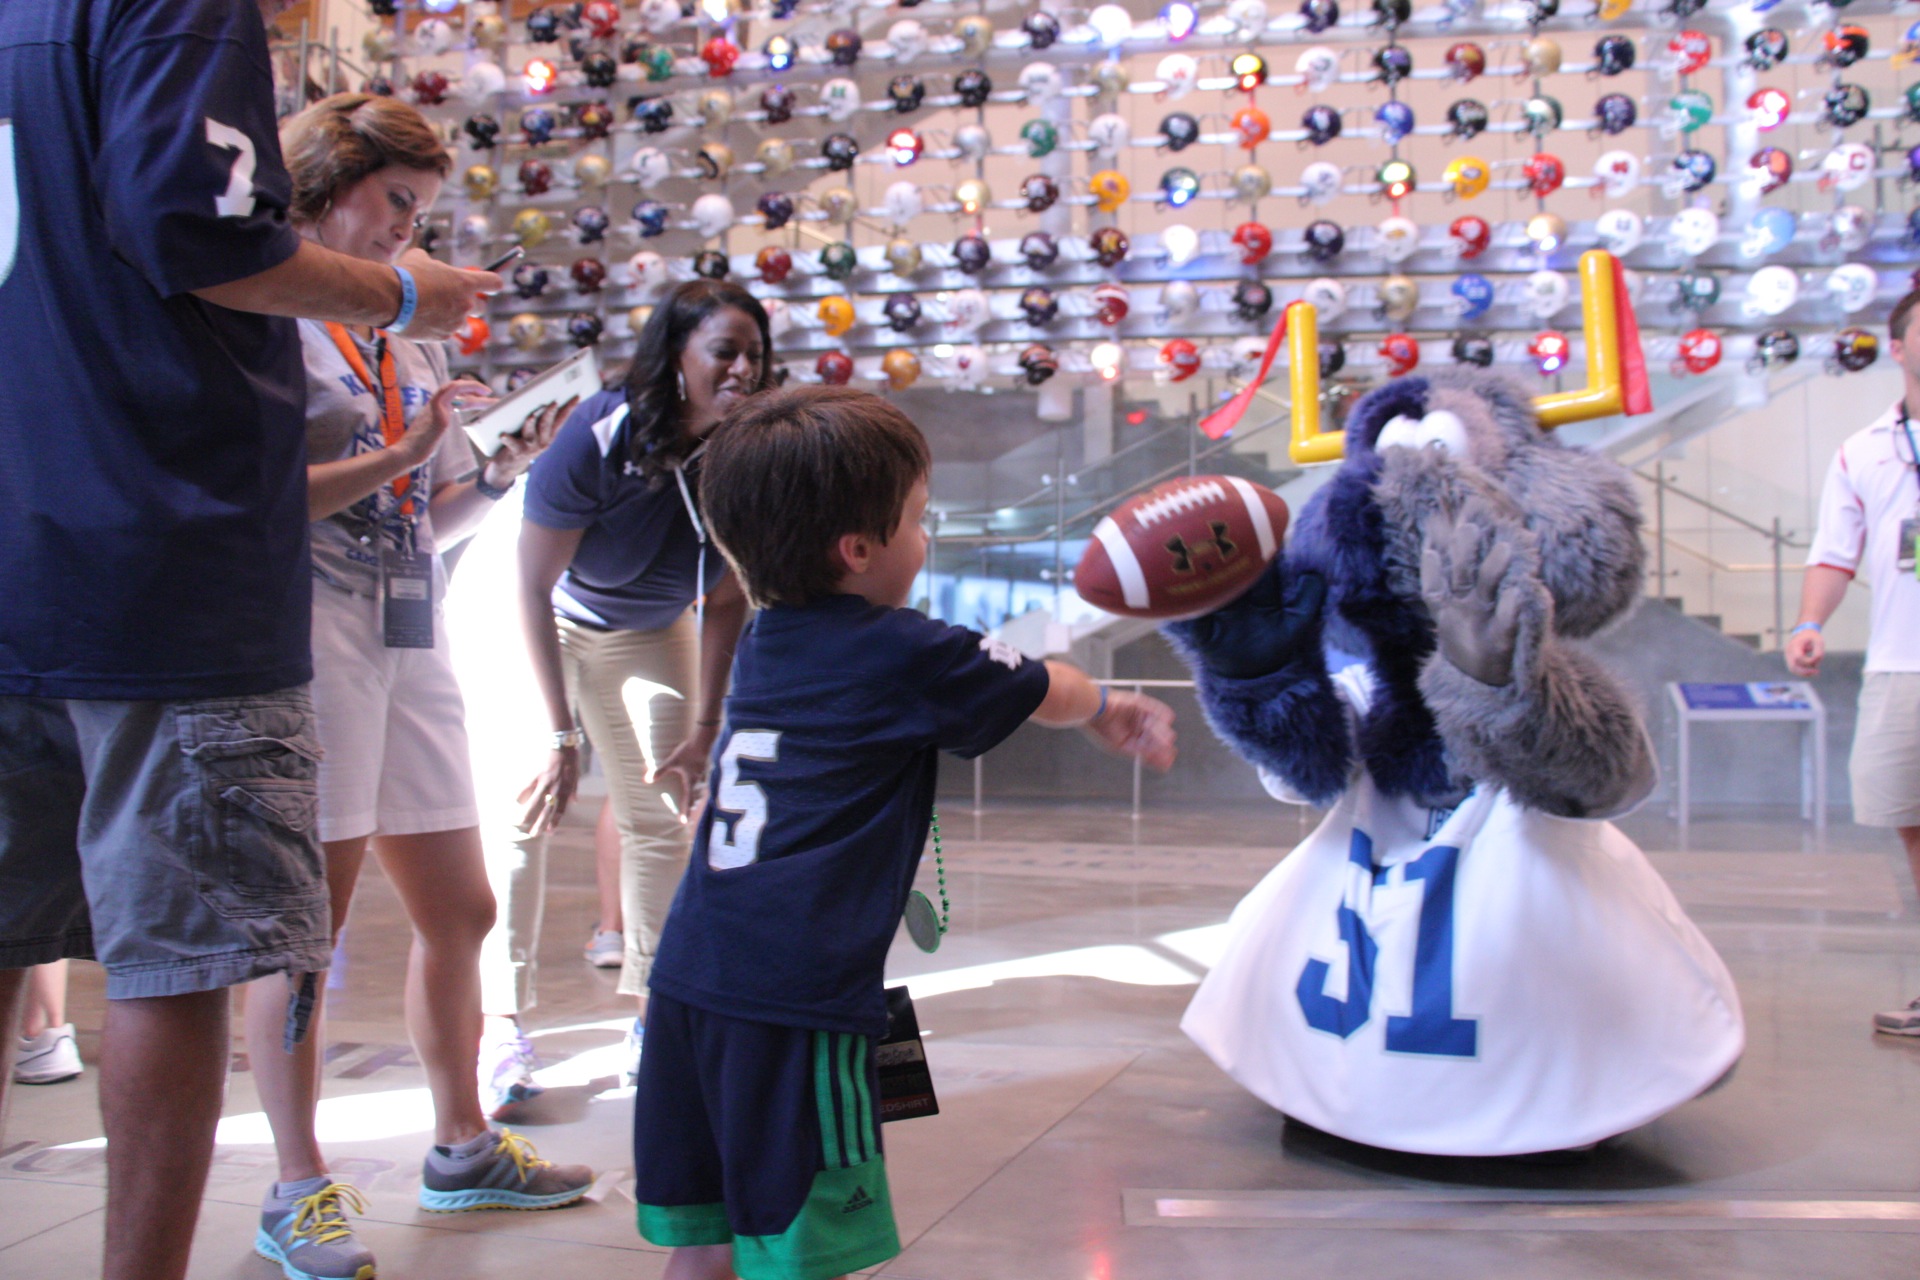 Fumbles Plays Catch With Young Fan